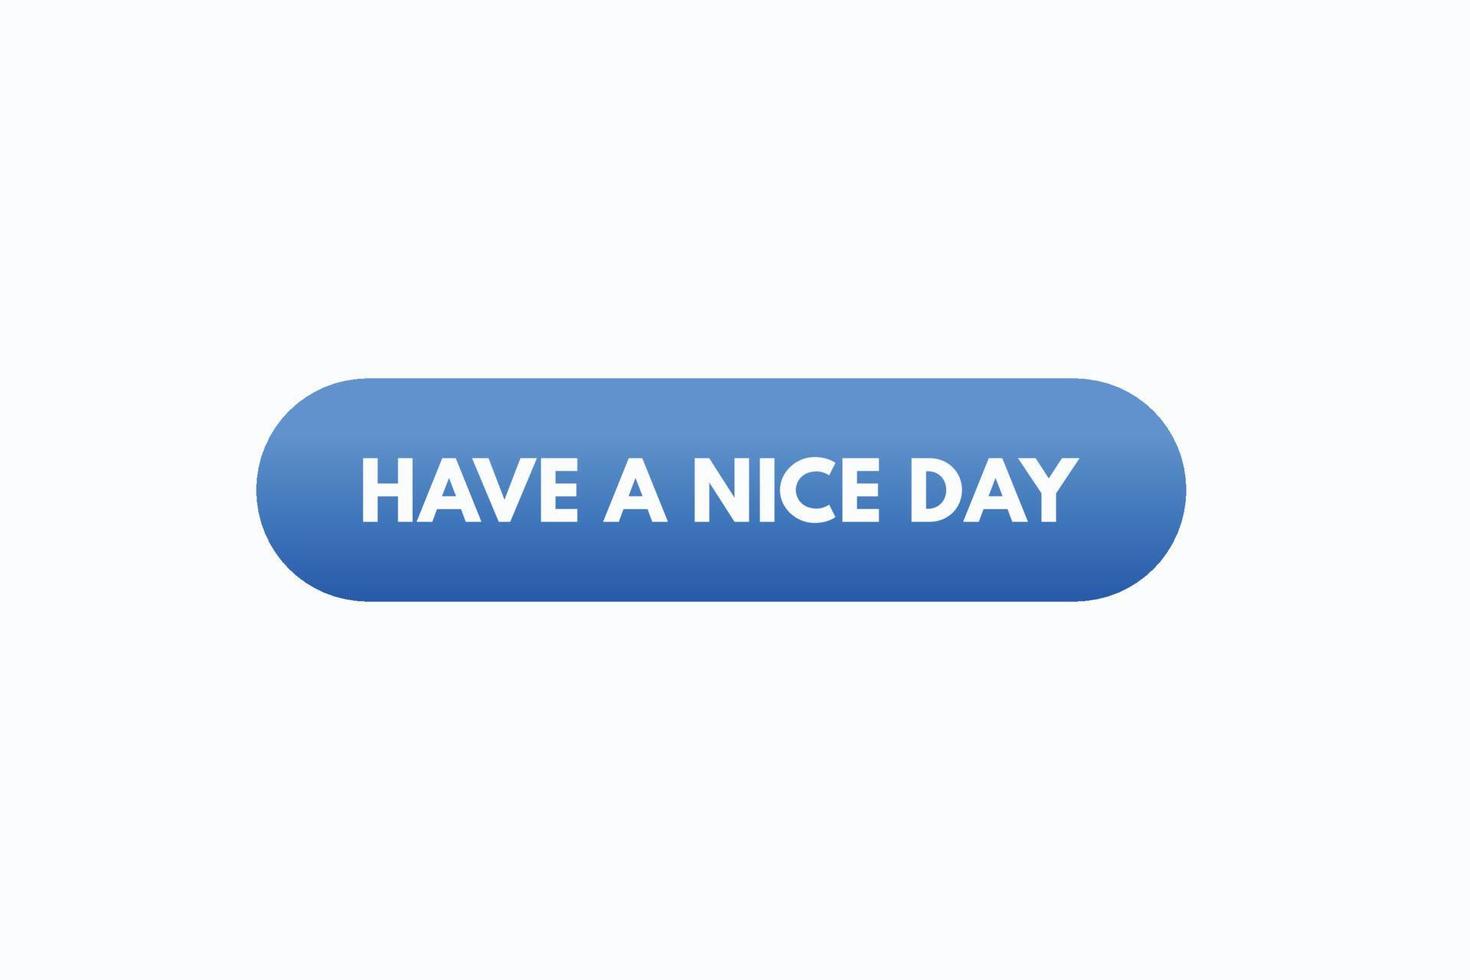 have a nice day button vectors. sign label speech bubble have a nice day vector